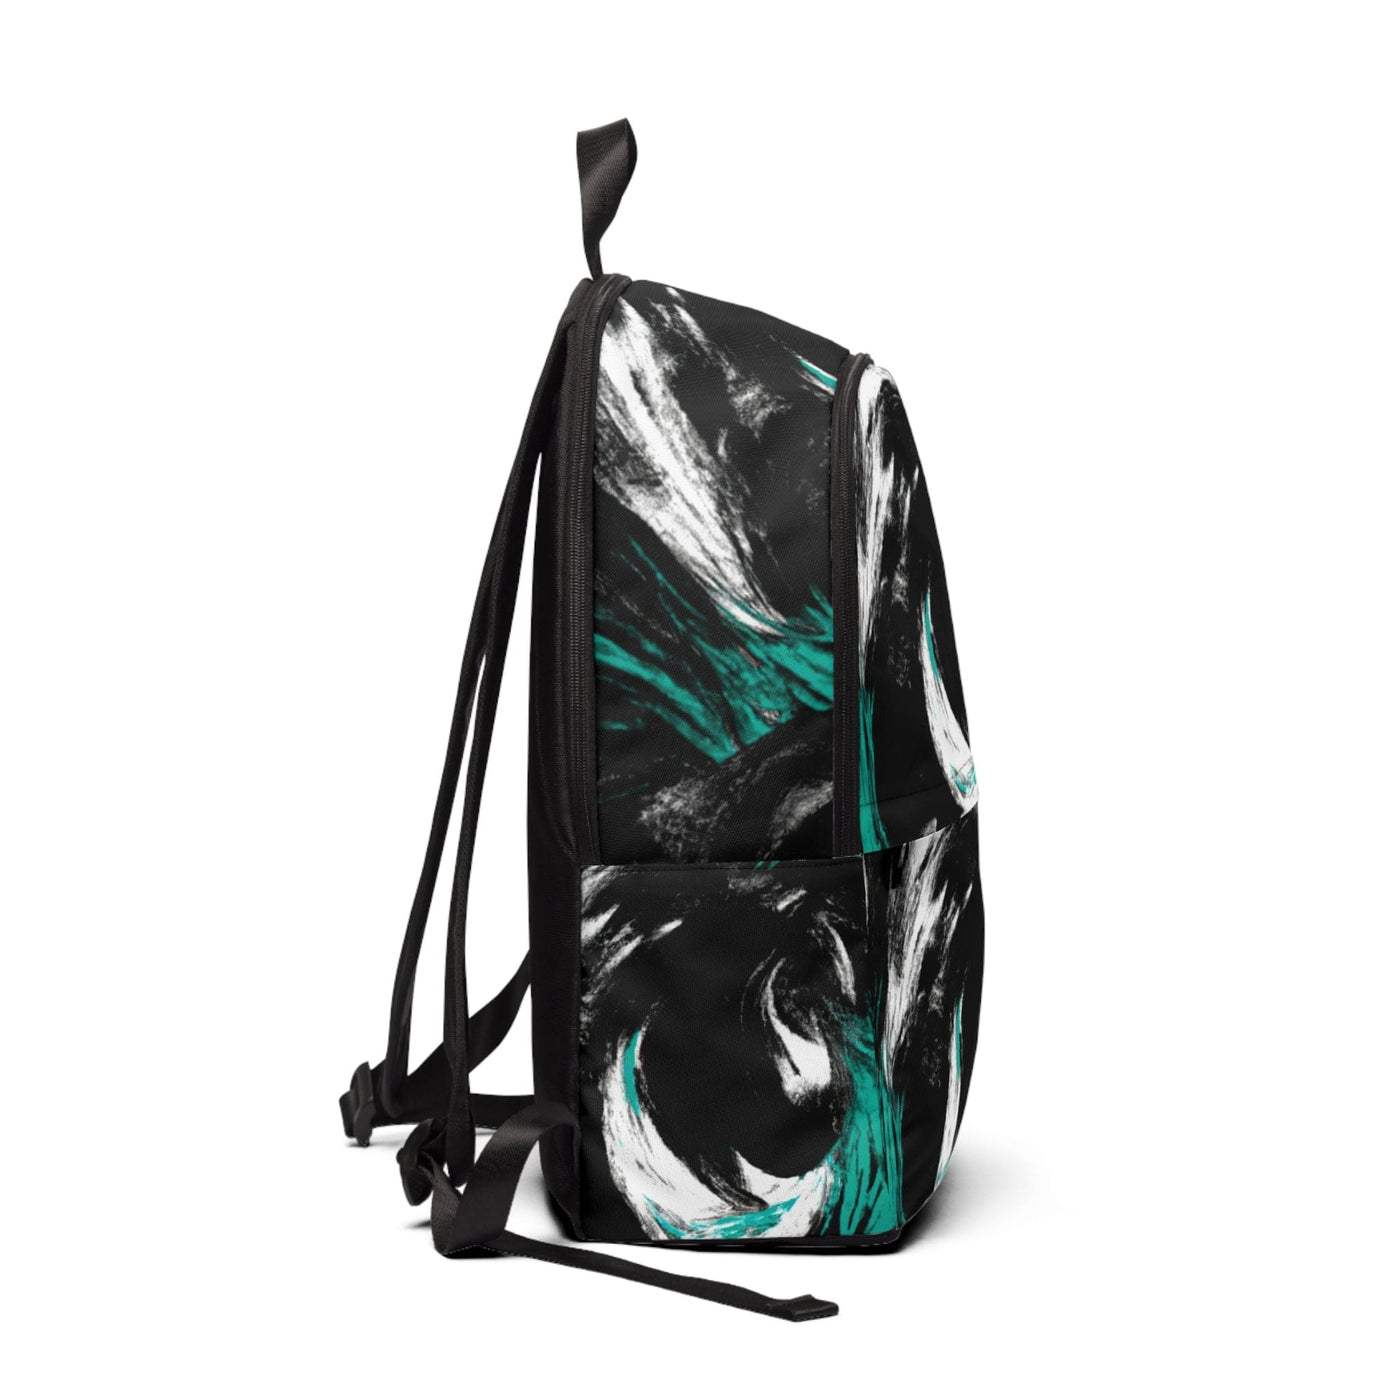 Fashion Backpack Waterproof Black Green White Abstract Pattern - Bags